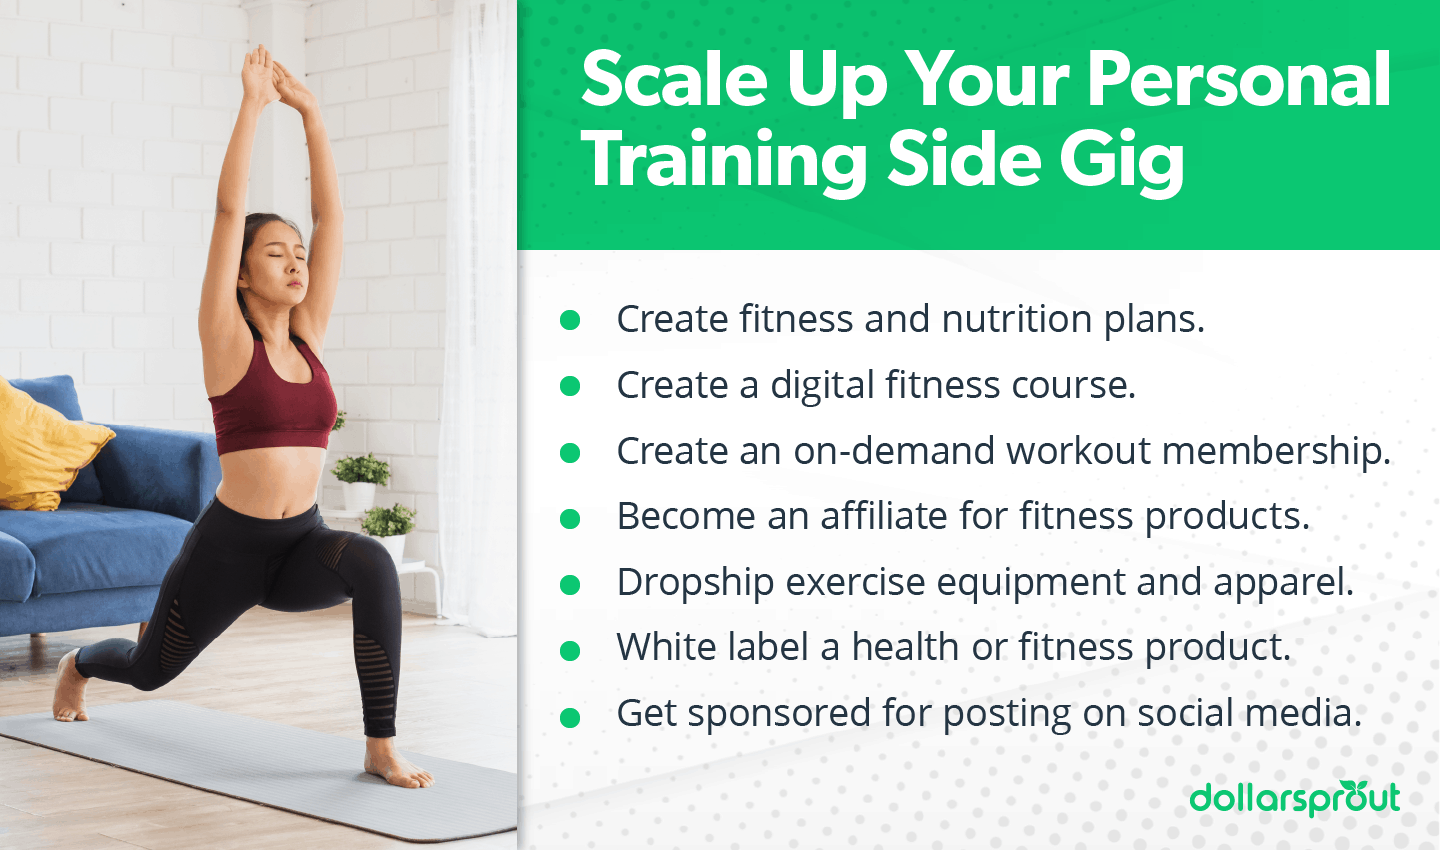 Scale Your Personal Training Side Gig